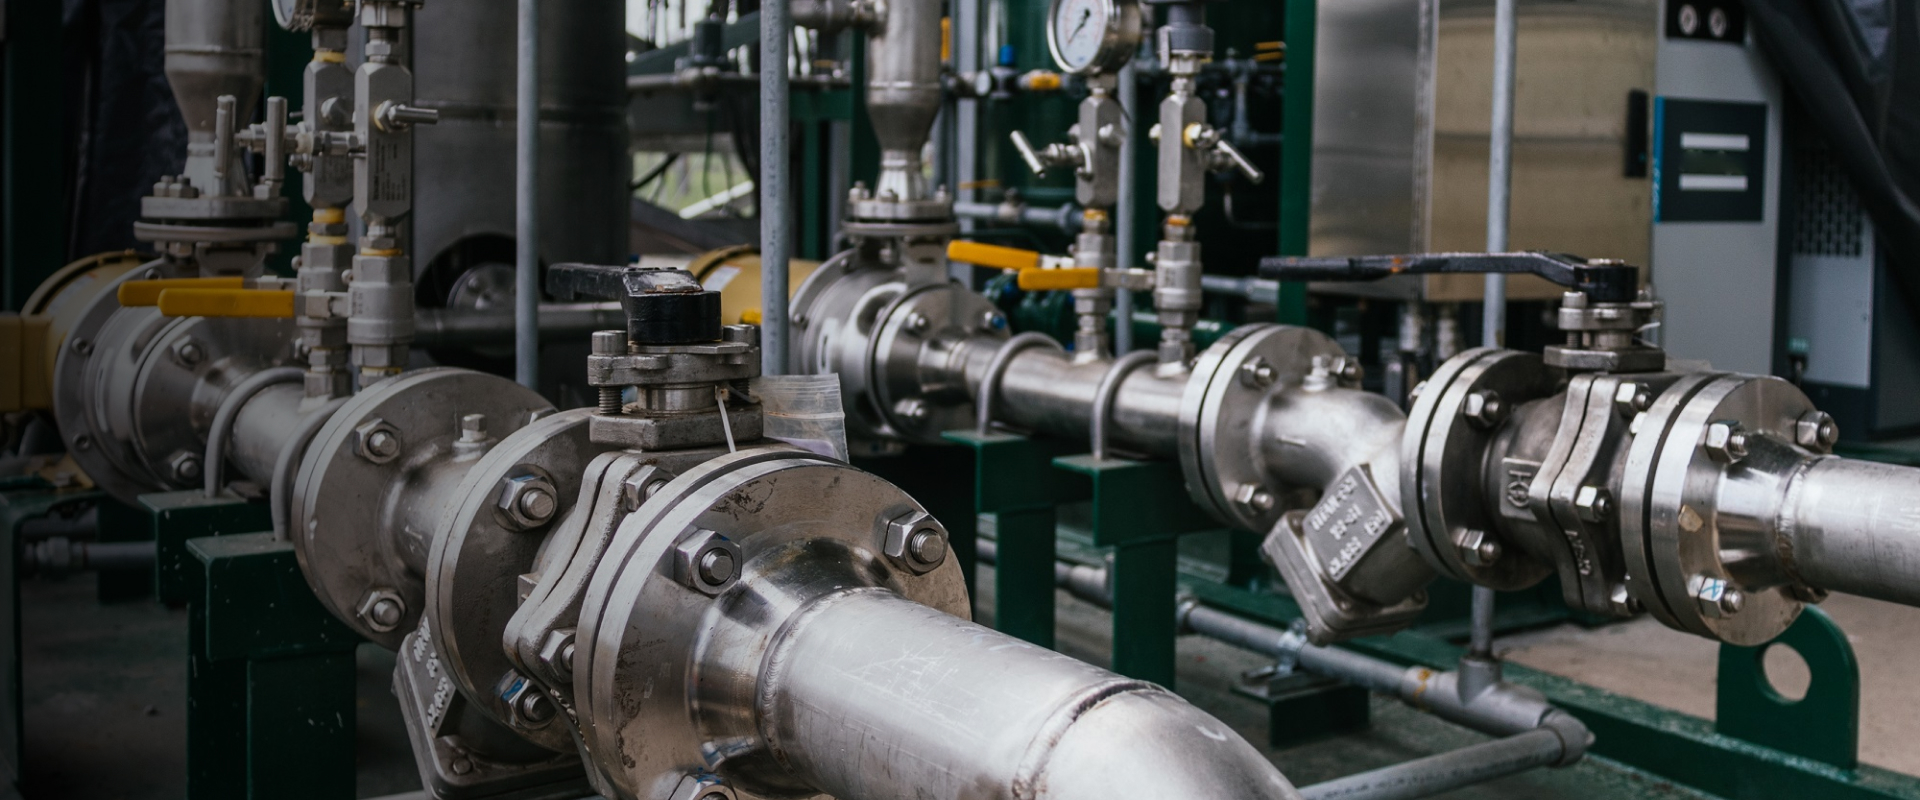 The system of pipelines of industrial valves